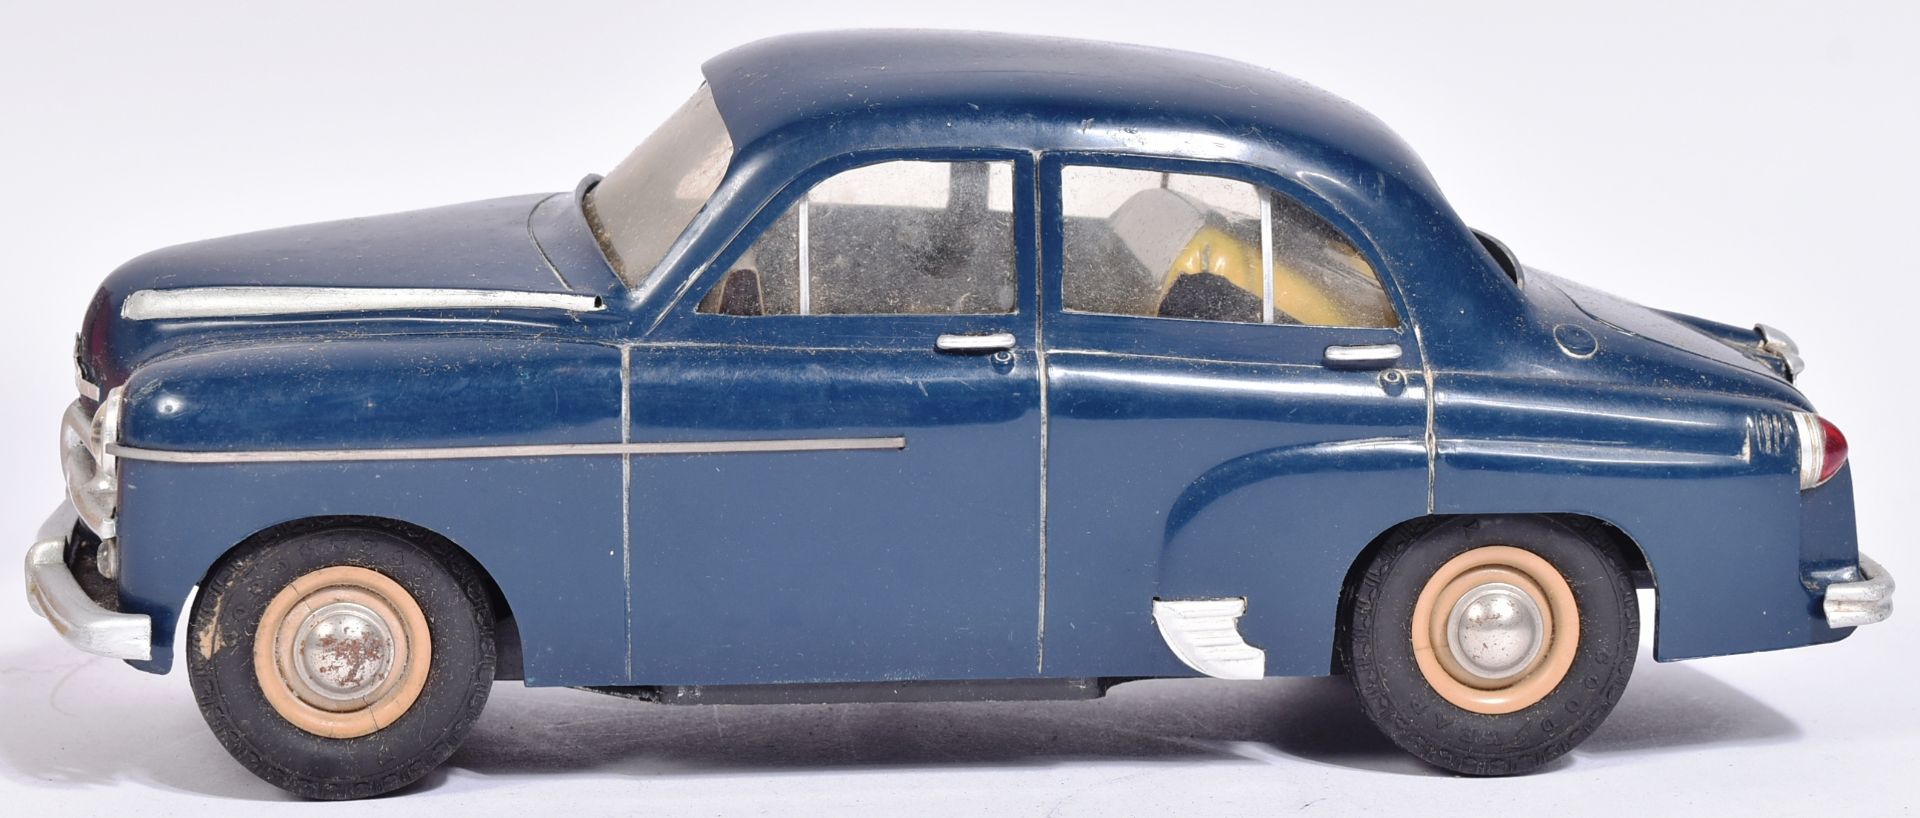 VICTORY MODELS 1953 VAUXHALL VELOX BATTERY OPERATED CAR - Image 2 of 6